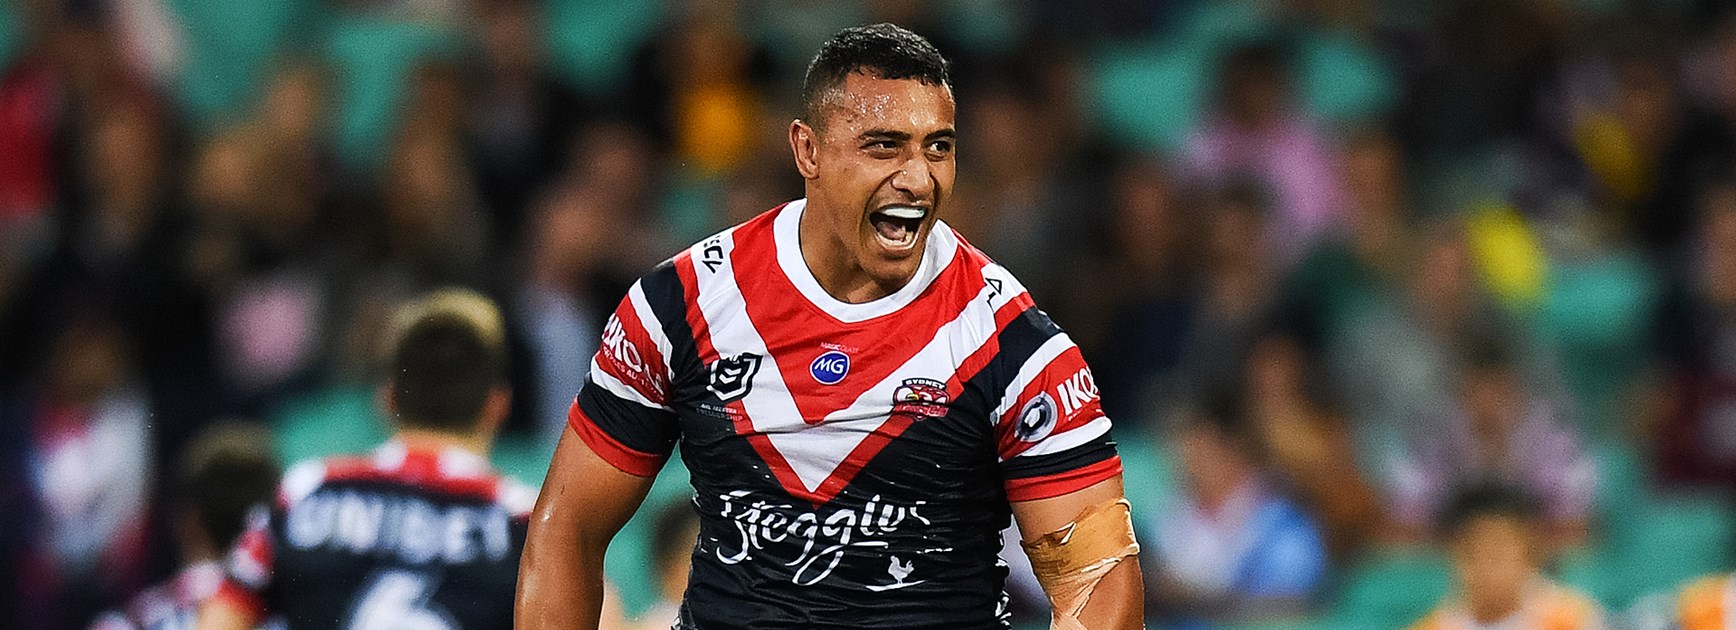 Resilient Taukeiaho defies injury to star again